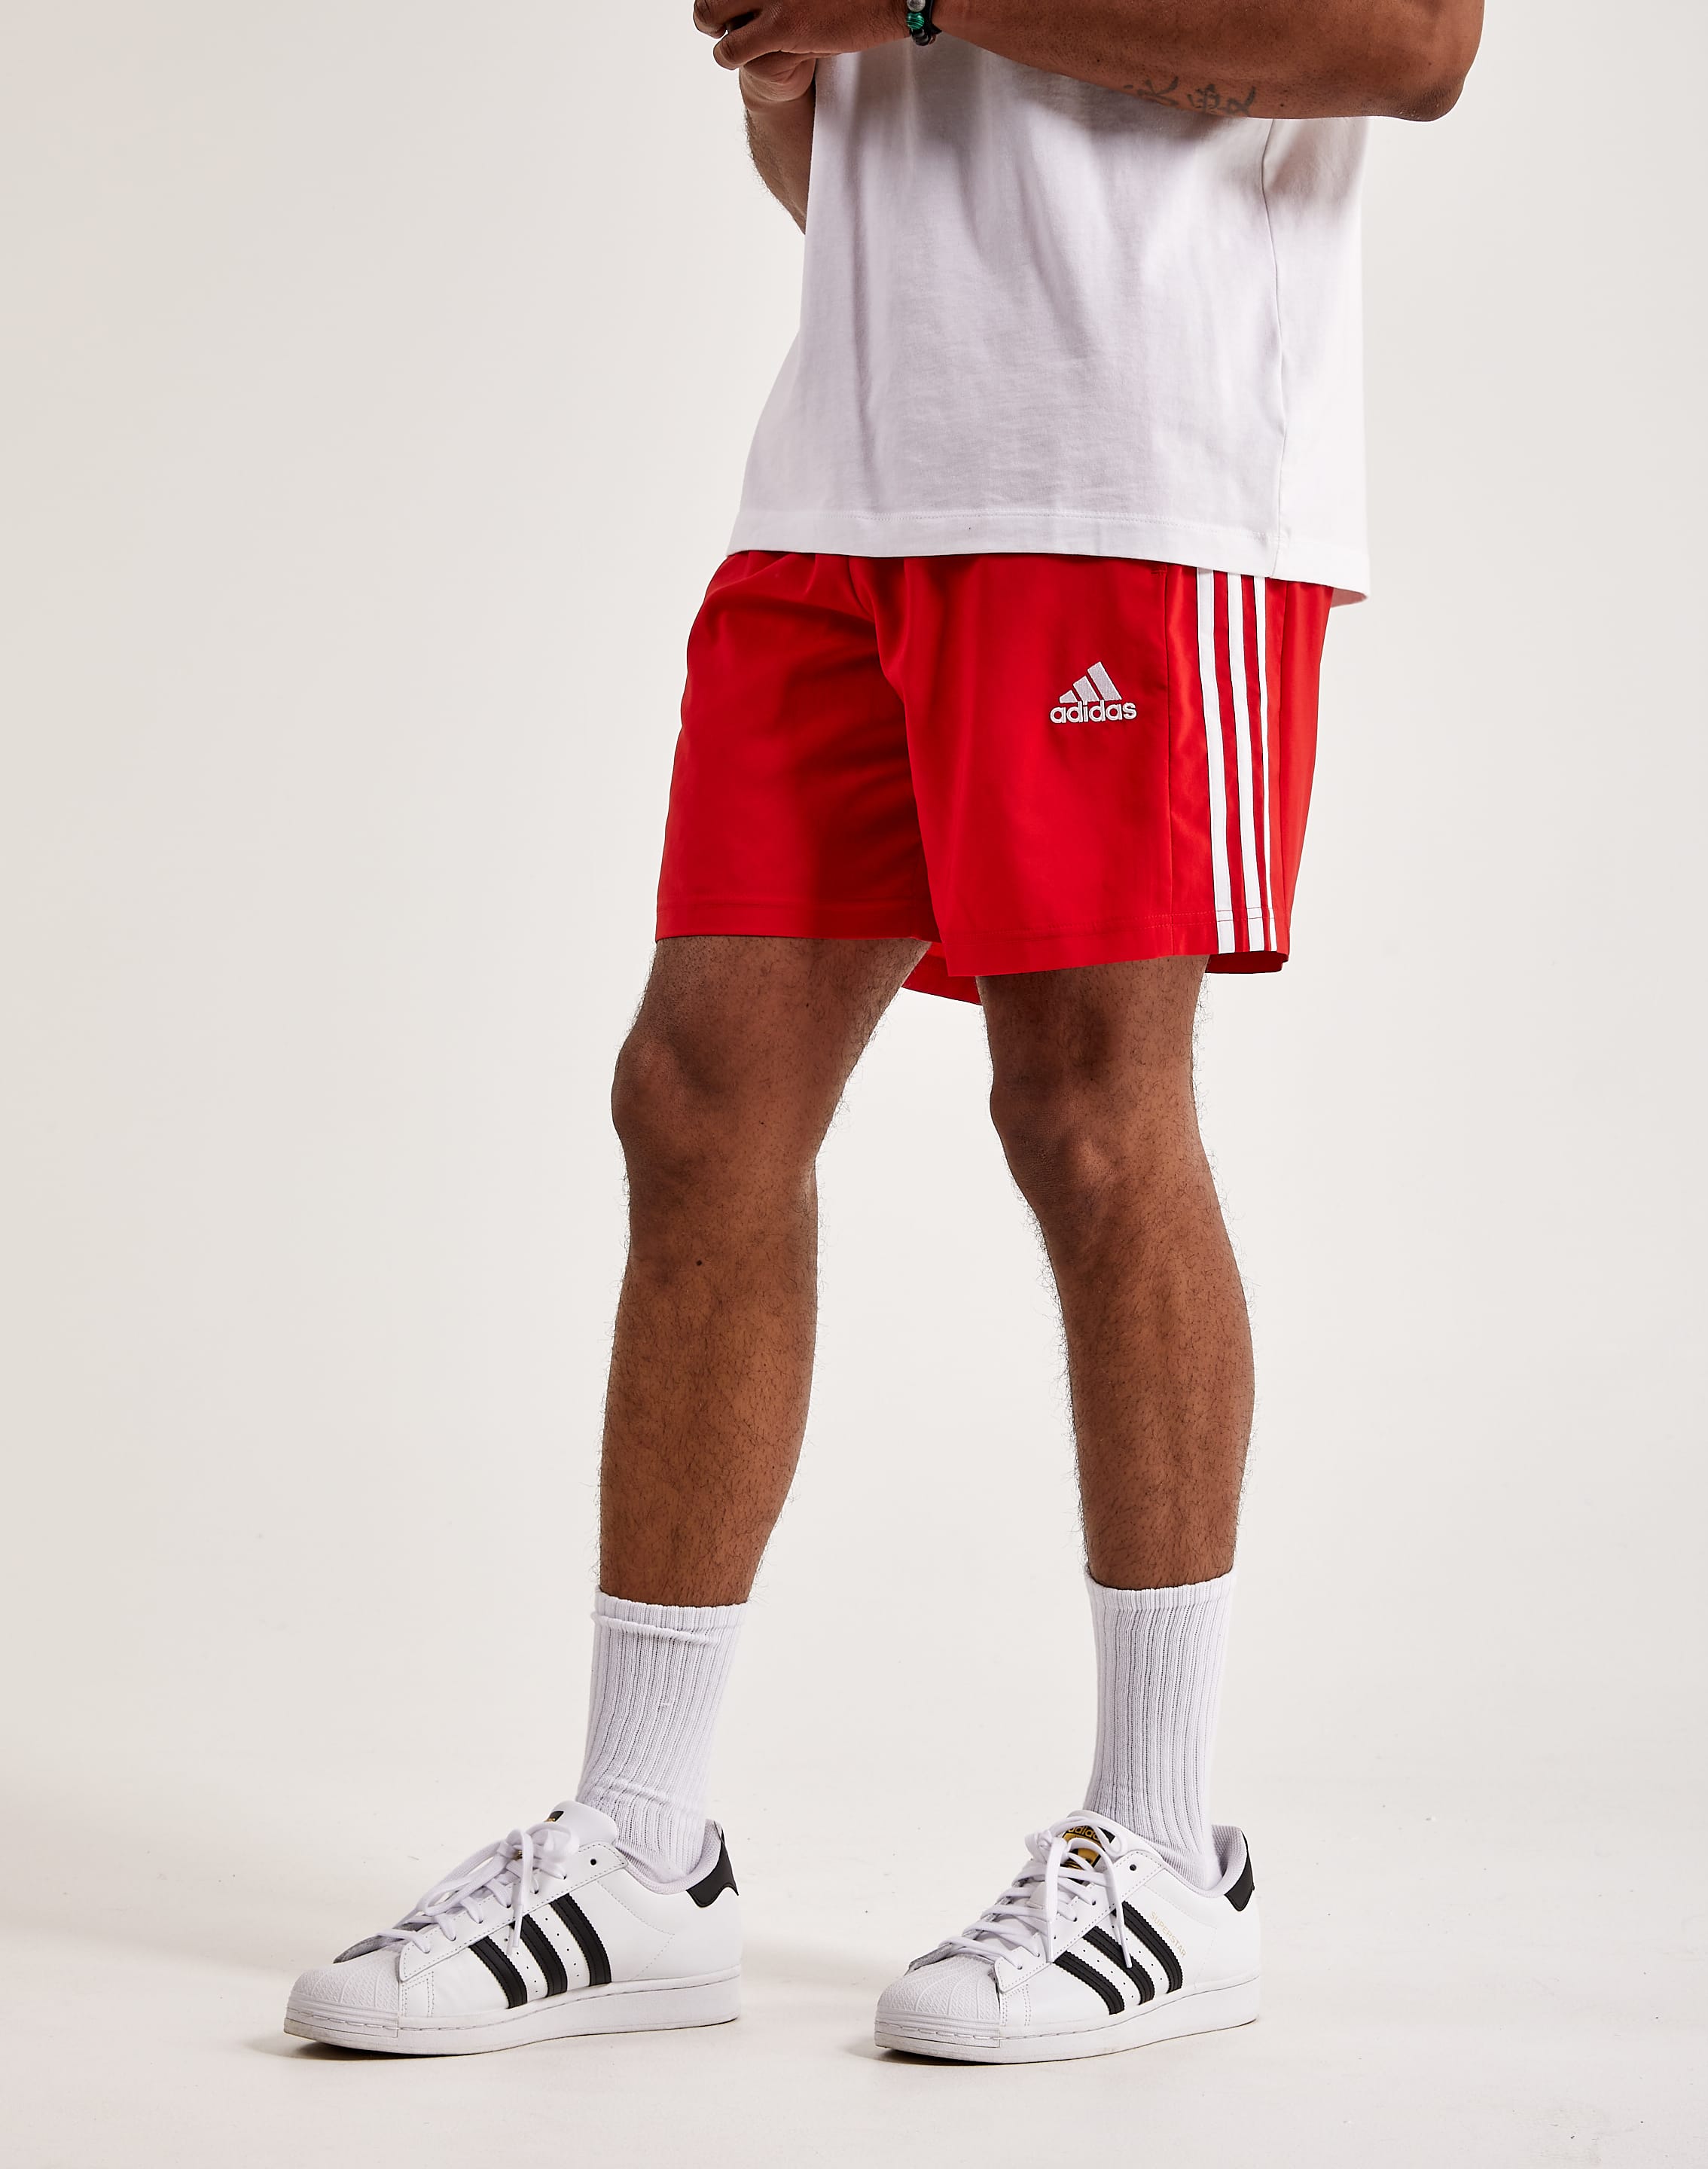 Chelsea DTLR – Adidas 3-Stripes Shorts